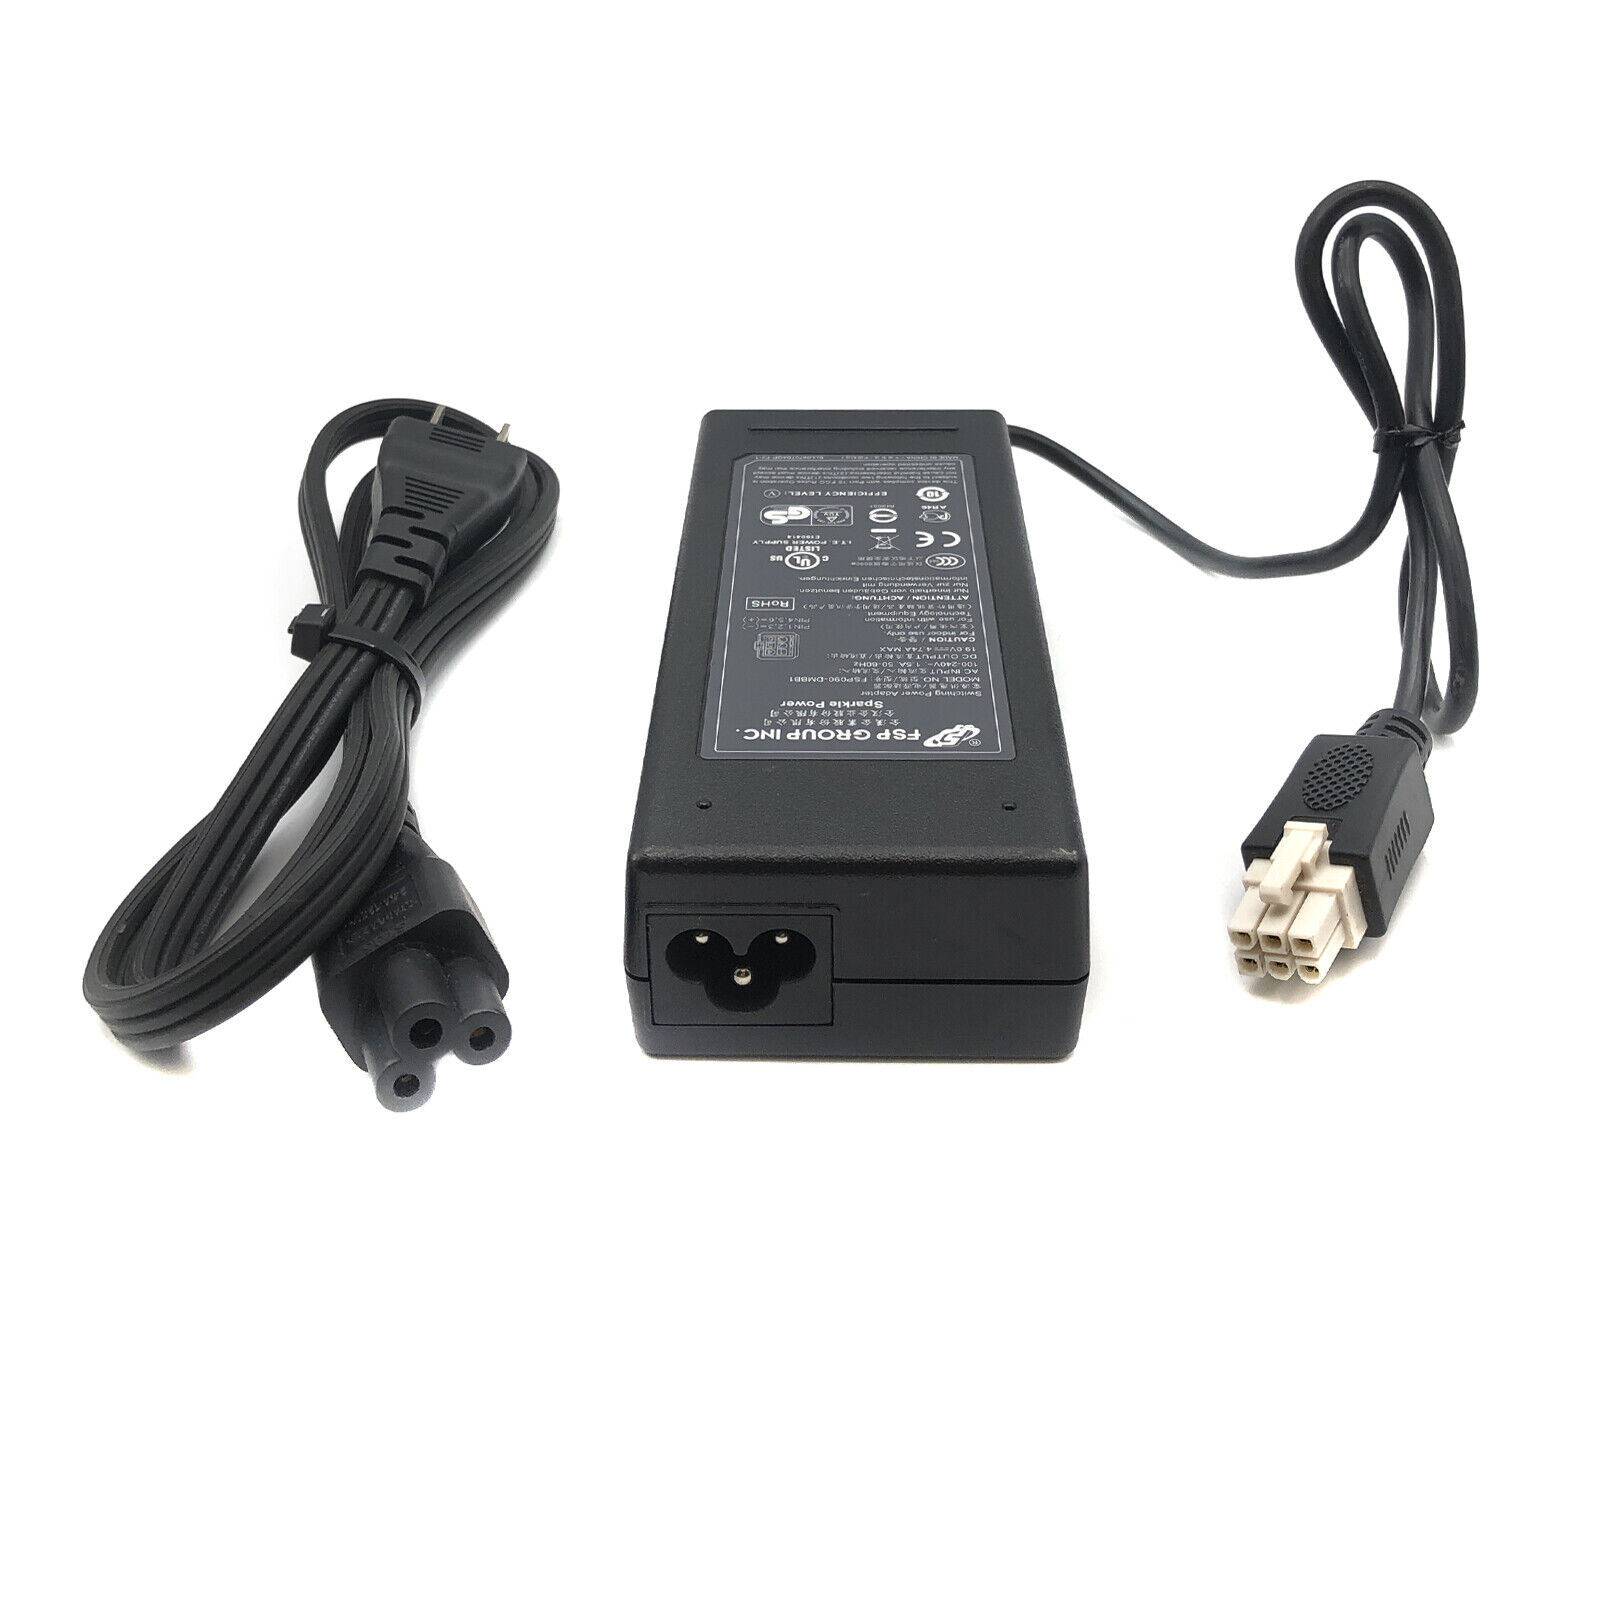 Genuine FSP AC Adapter for NCR 7745 Series POS Touchscreen Terminal w/Cord Brand FSP, FSP Group Inc Type AC/DC Adapter